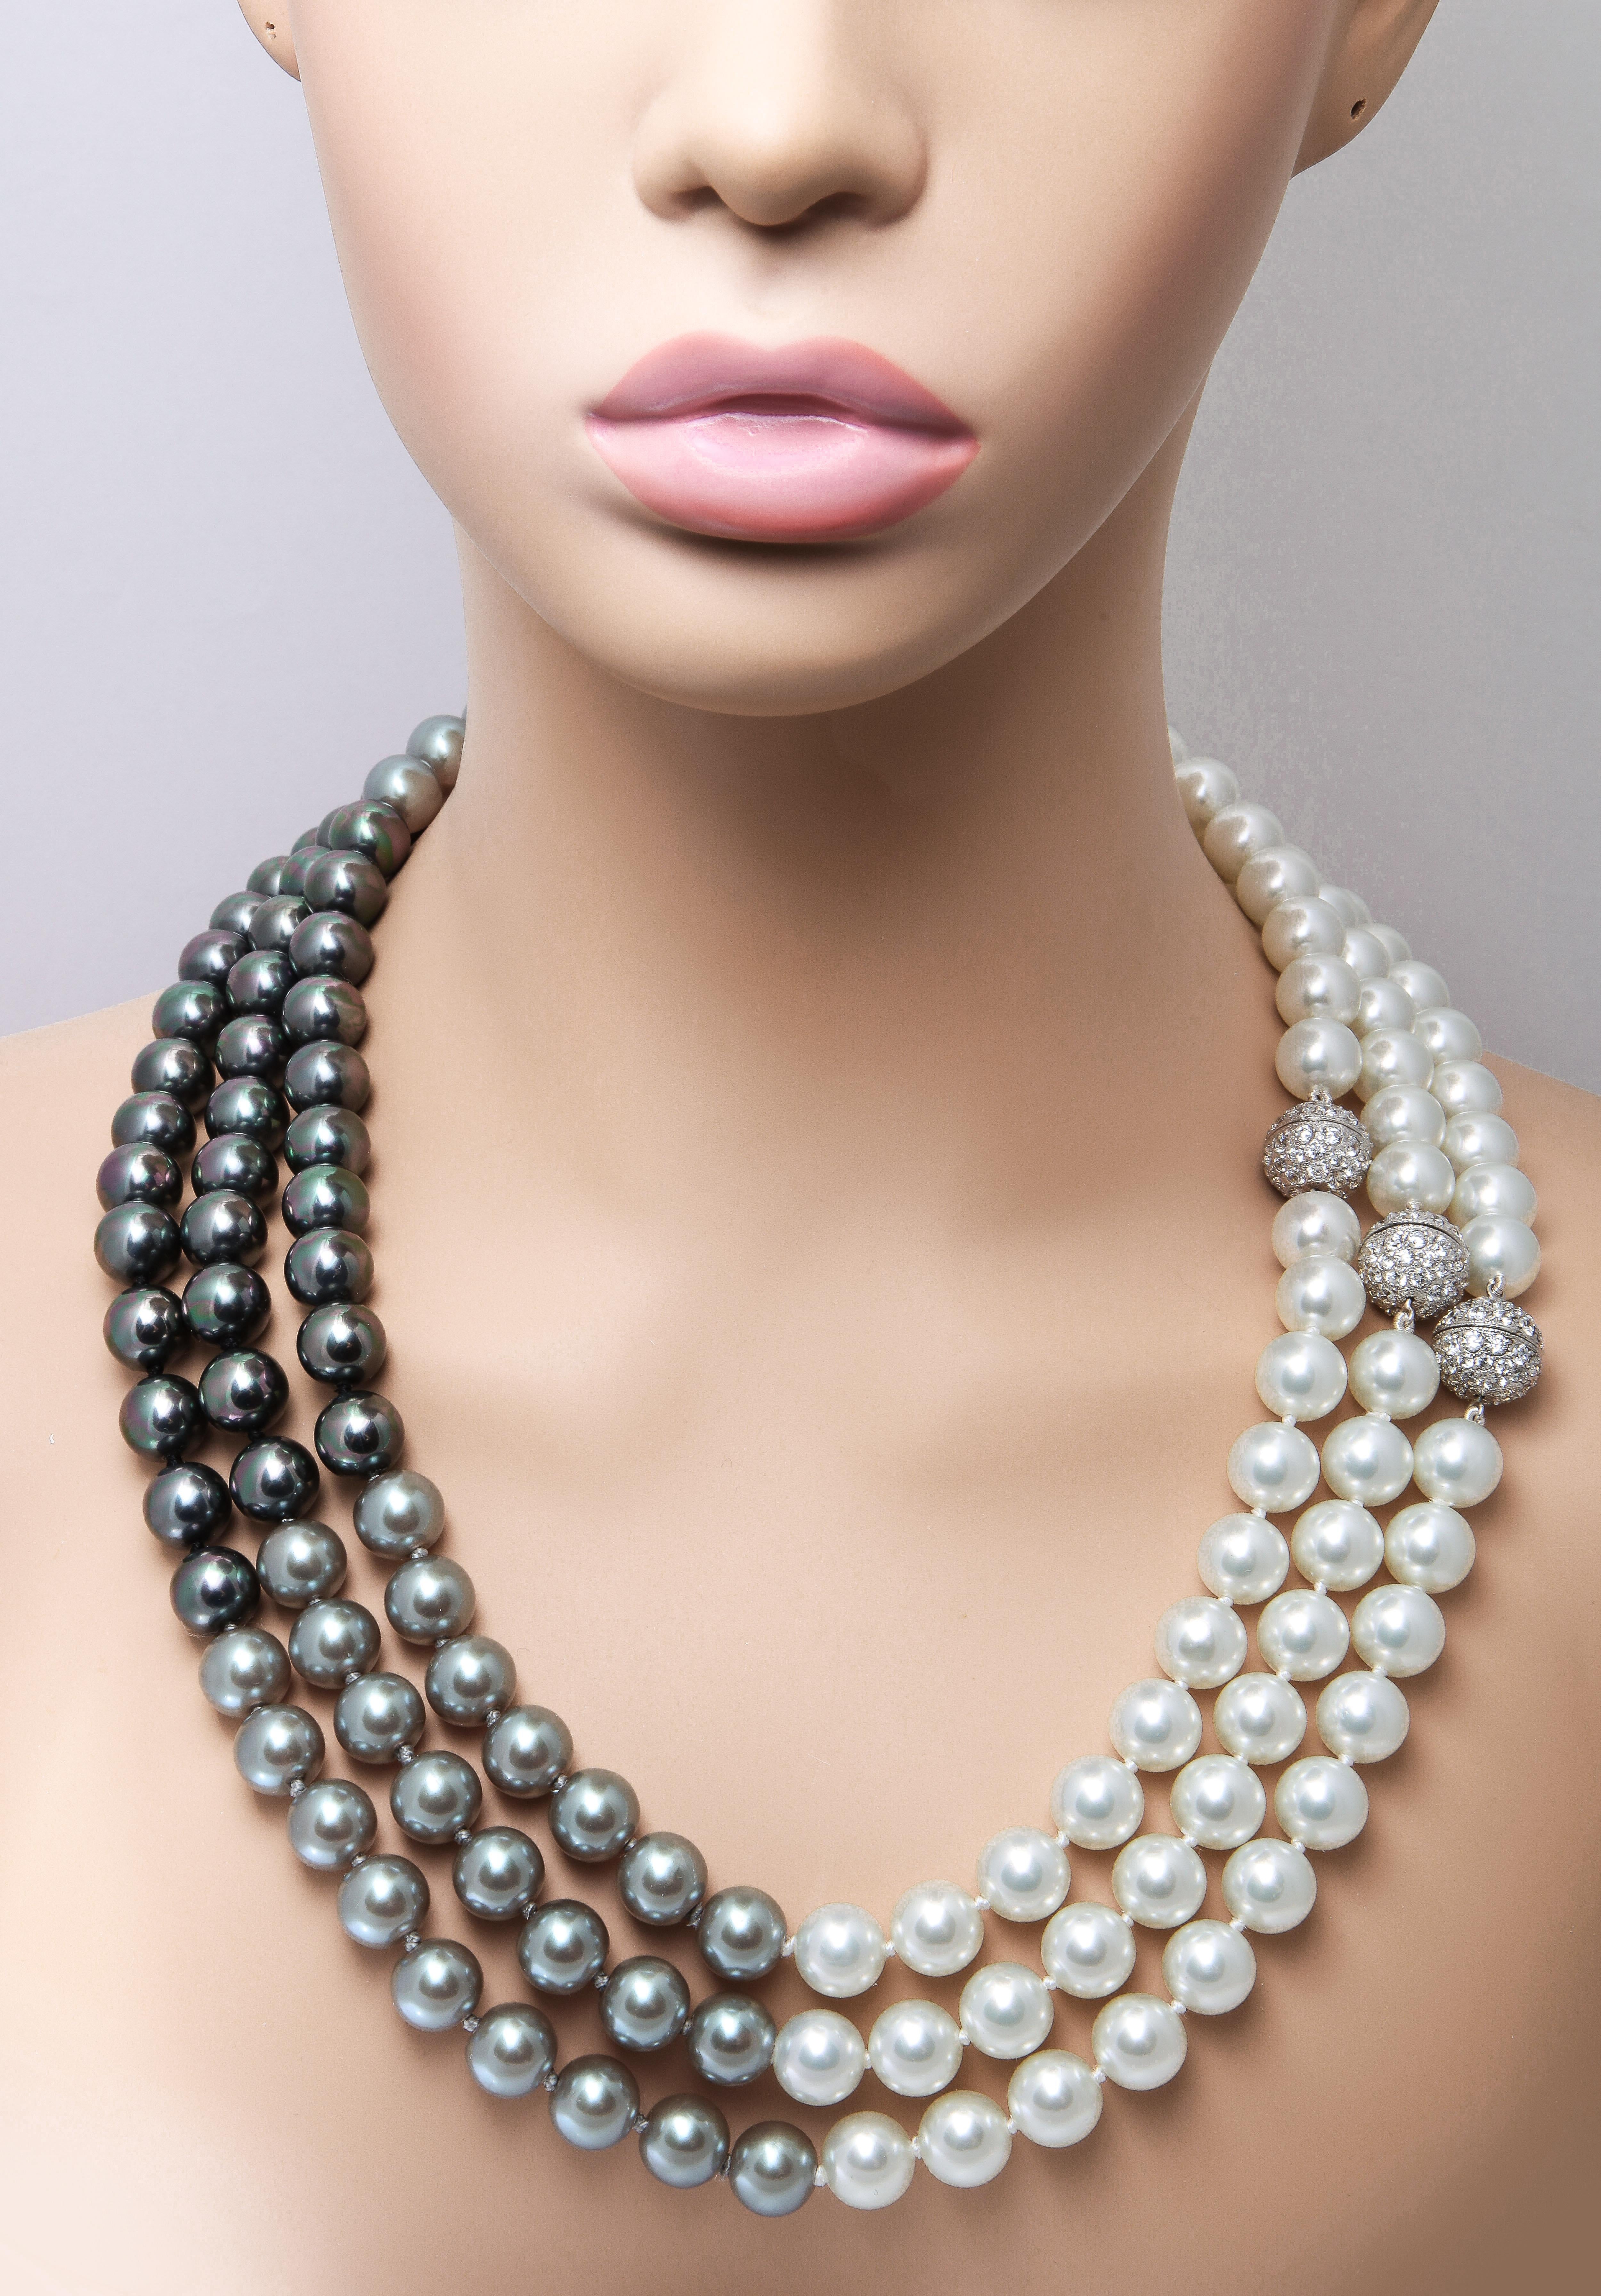  Shaded South Sea Manmade Pearls  Separable Three Necklaces Mikimoto Style 3